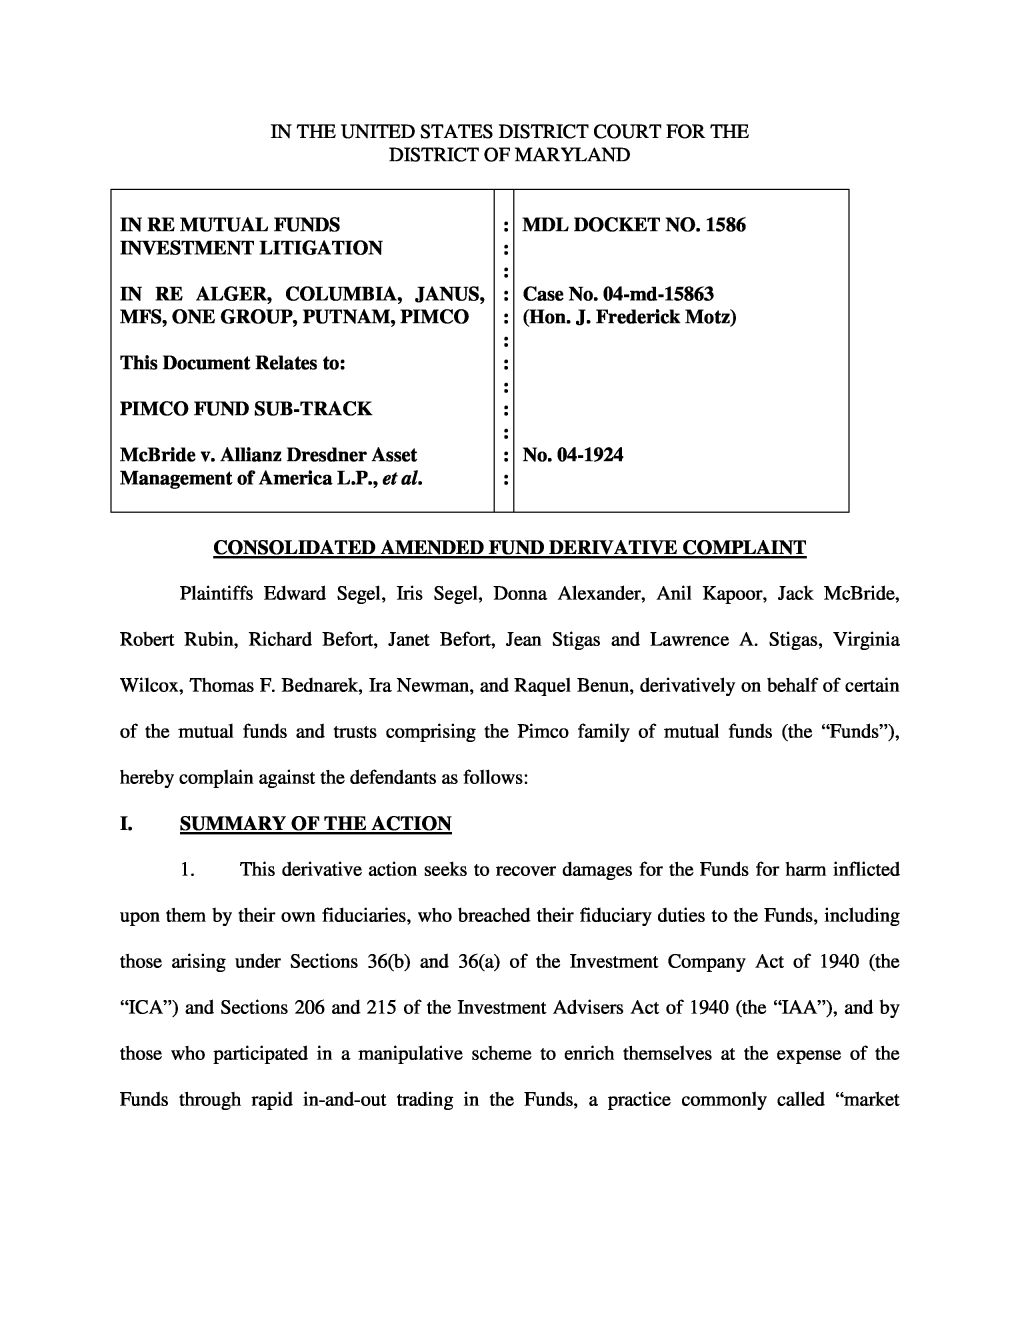 In Re Alger, Columbia, Janus, MFS, One Group, Putnam, PIMCO 04-MD-15863-Consolidated Amended Fund Derivative Complaint